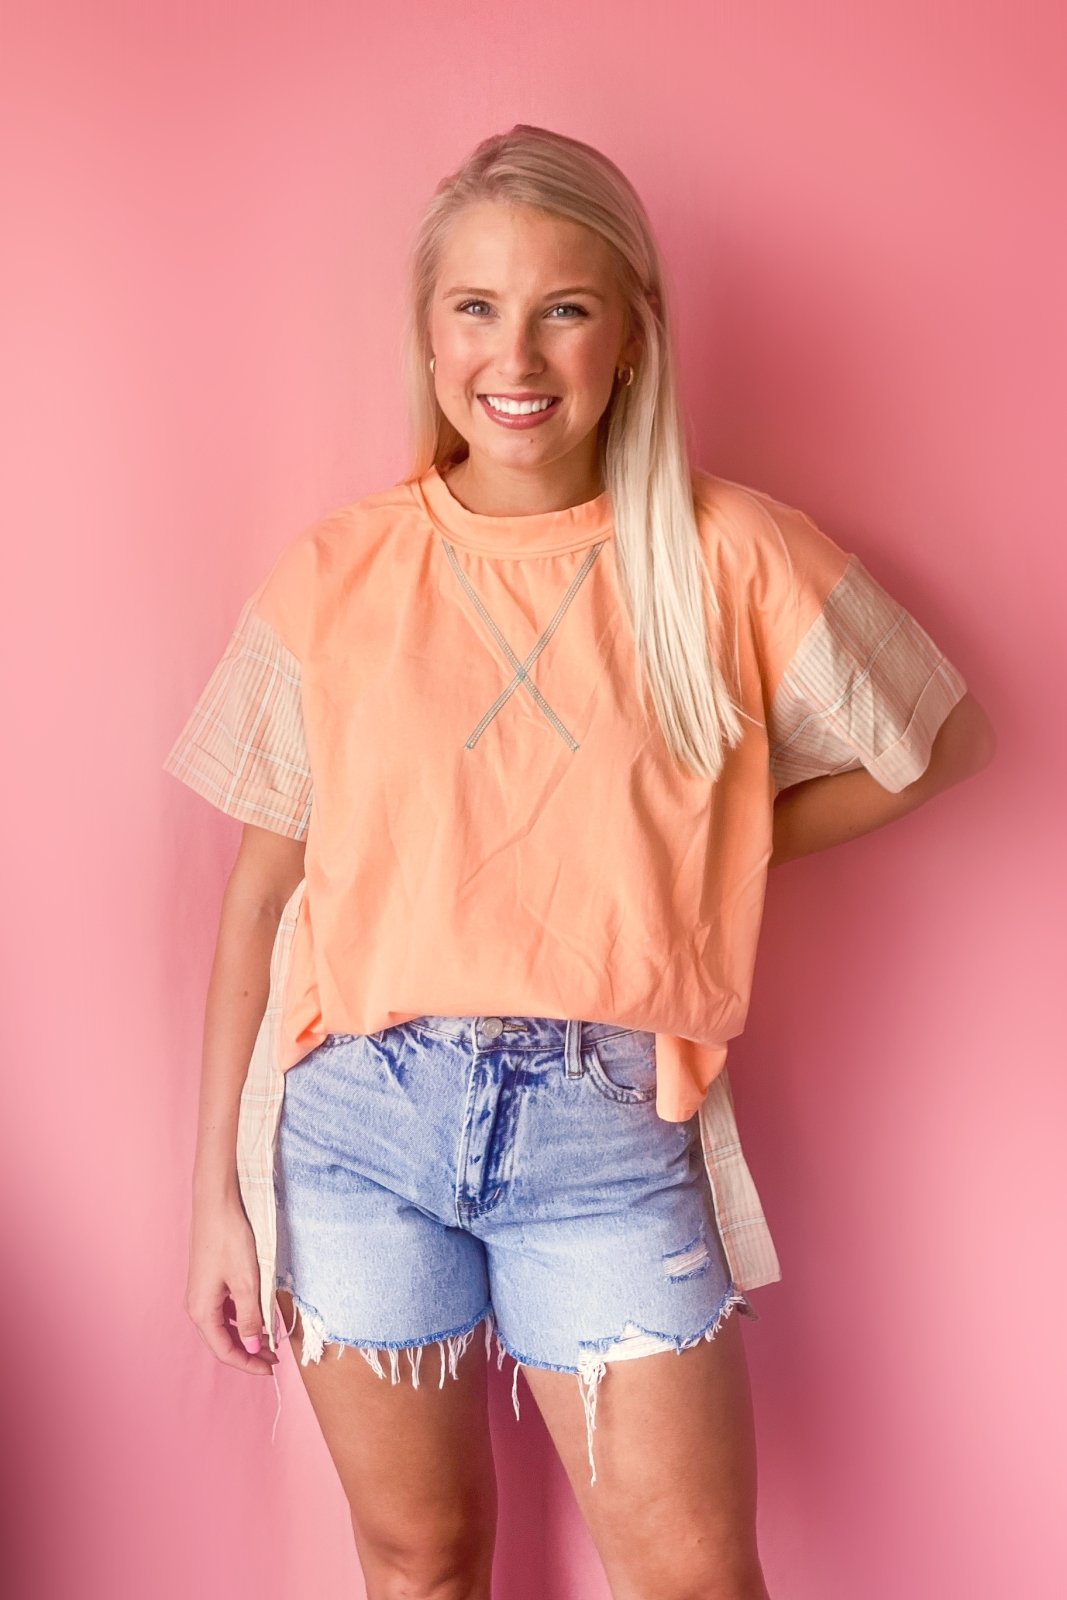 Orange Creamsicle Top - GYTO Collective - Get Your Teach On